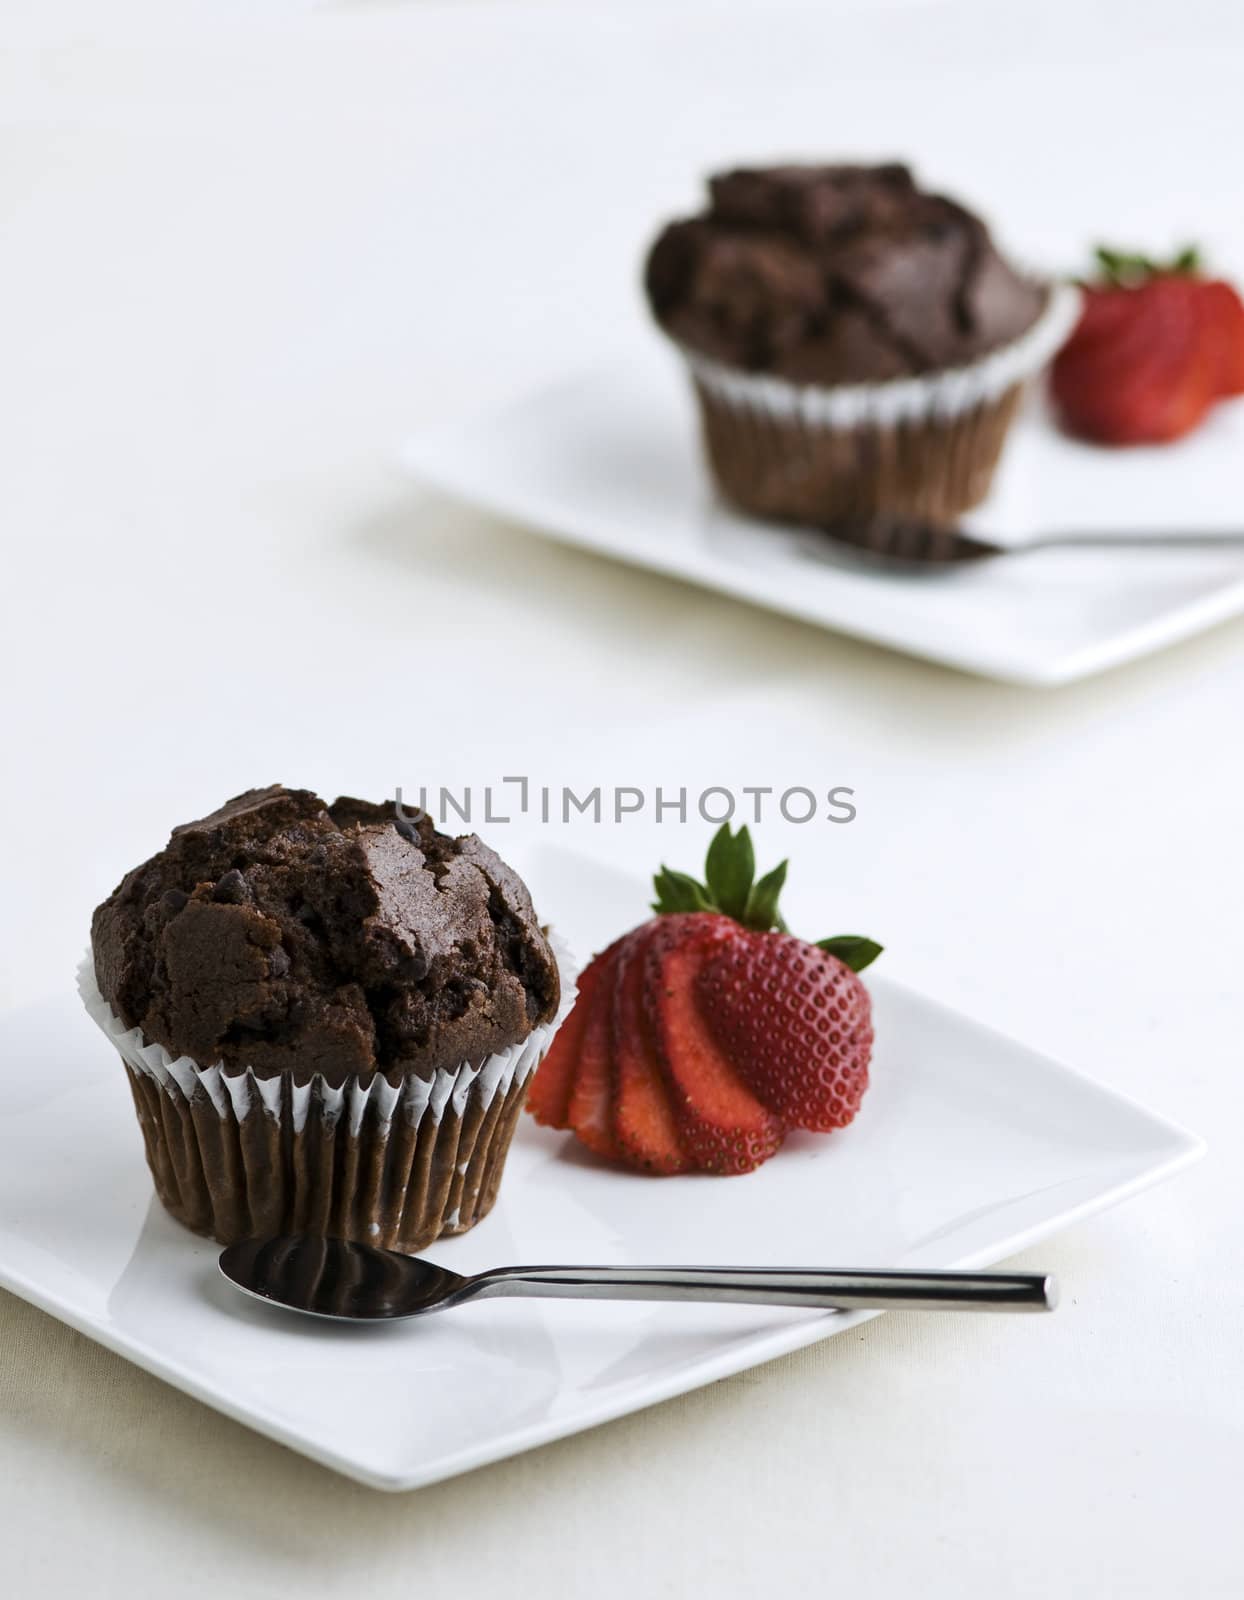 2 plates with chocolate muffins garnished with a strawberry.